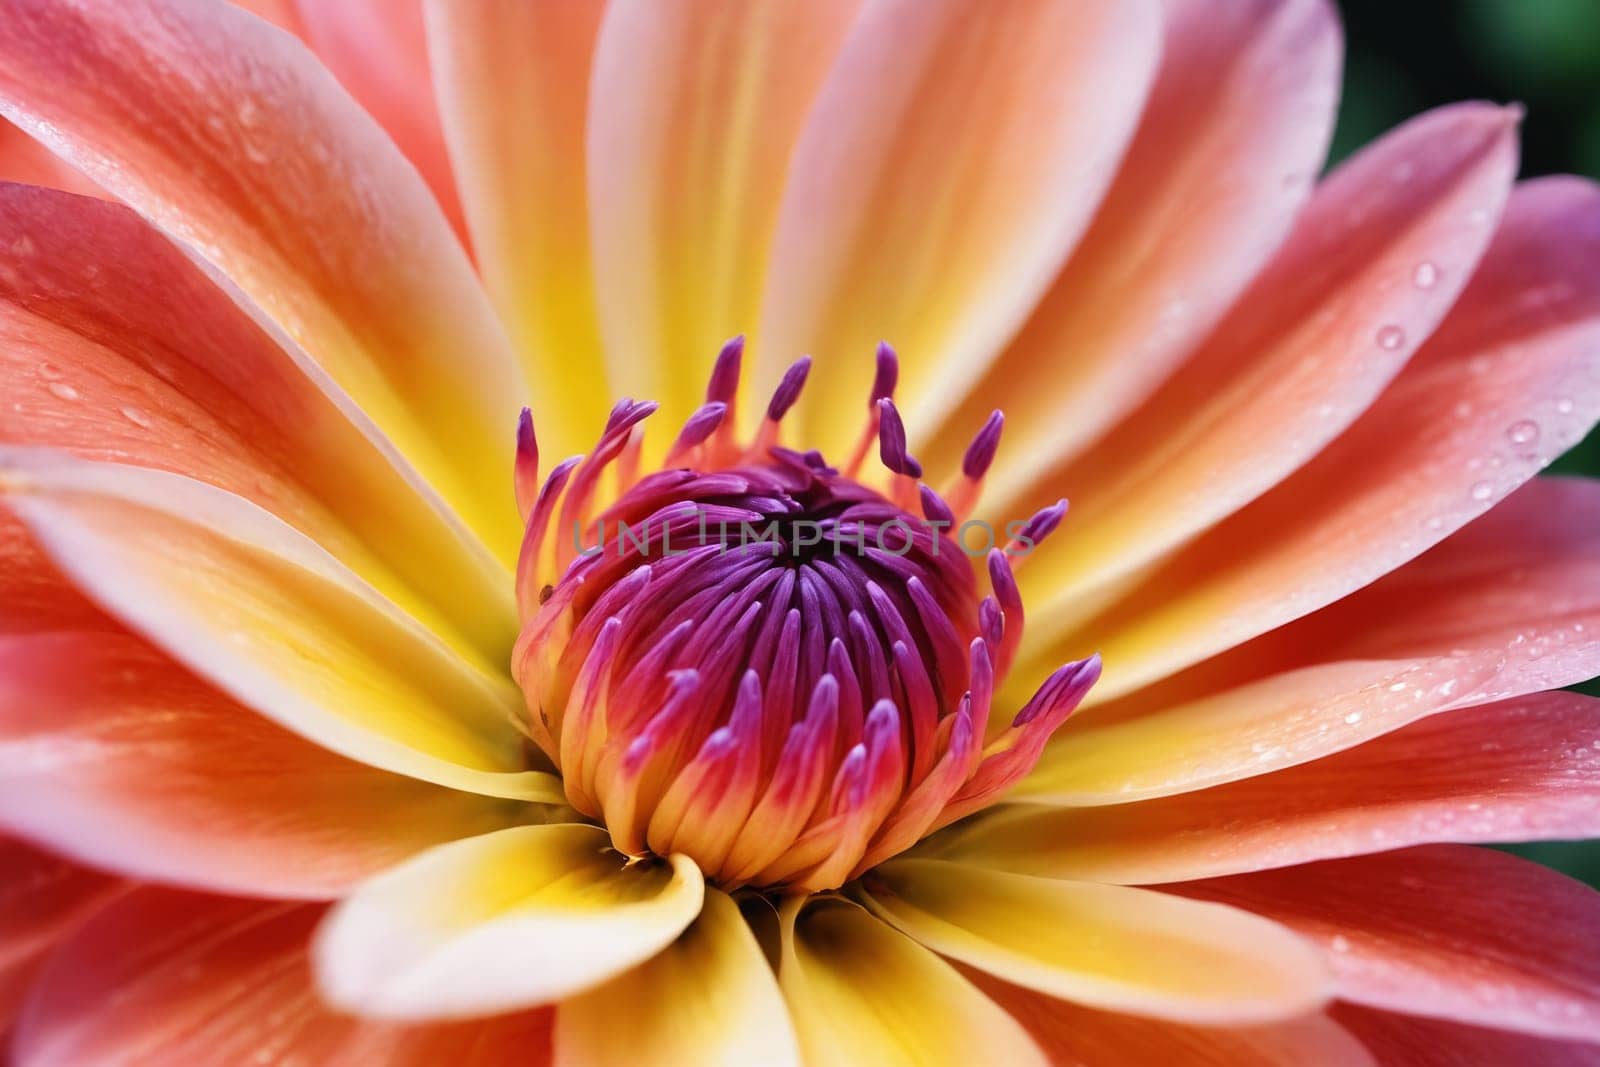 Dew-kissed Dahlia: A Spectrum from Pink to Orange by Andre1ns